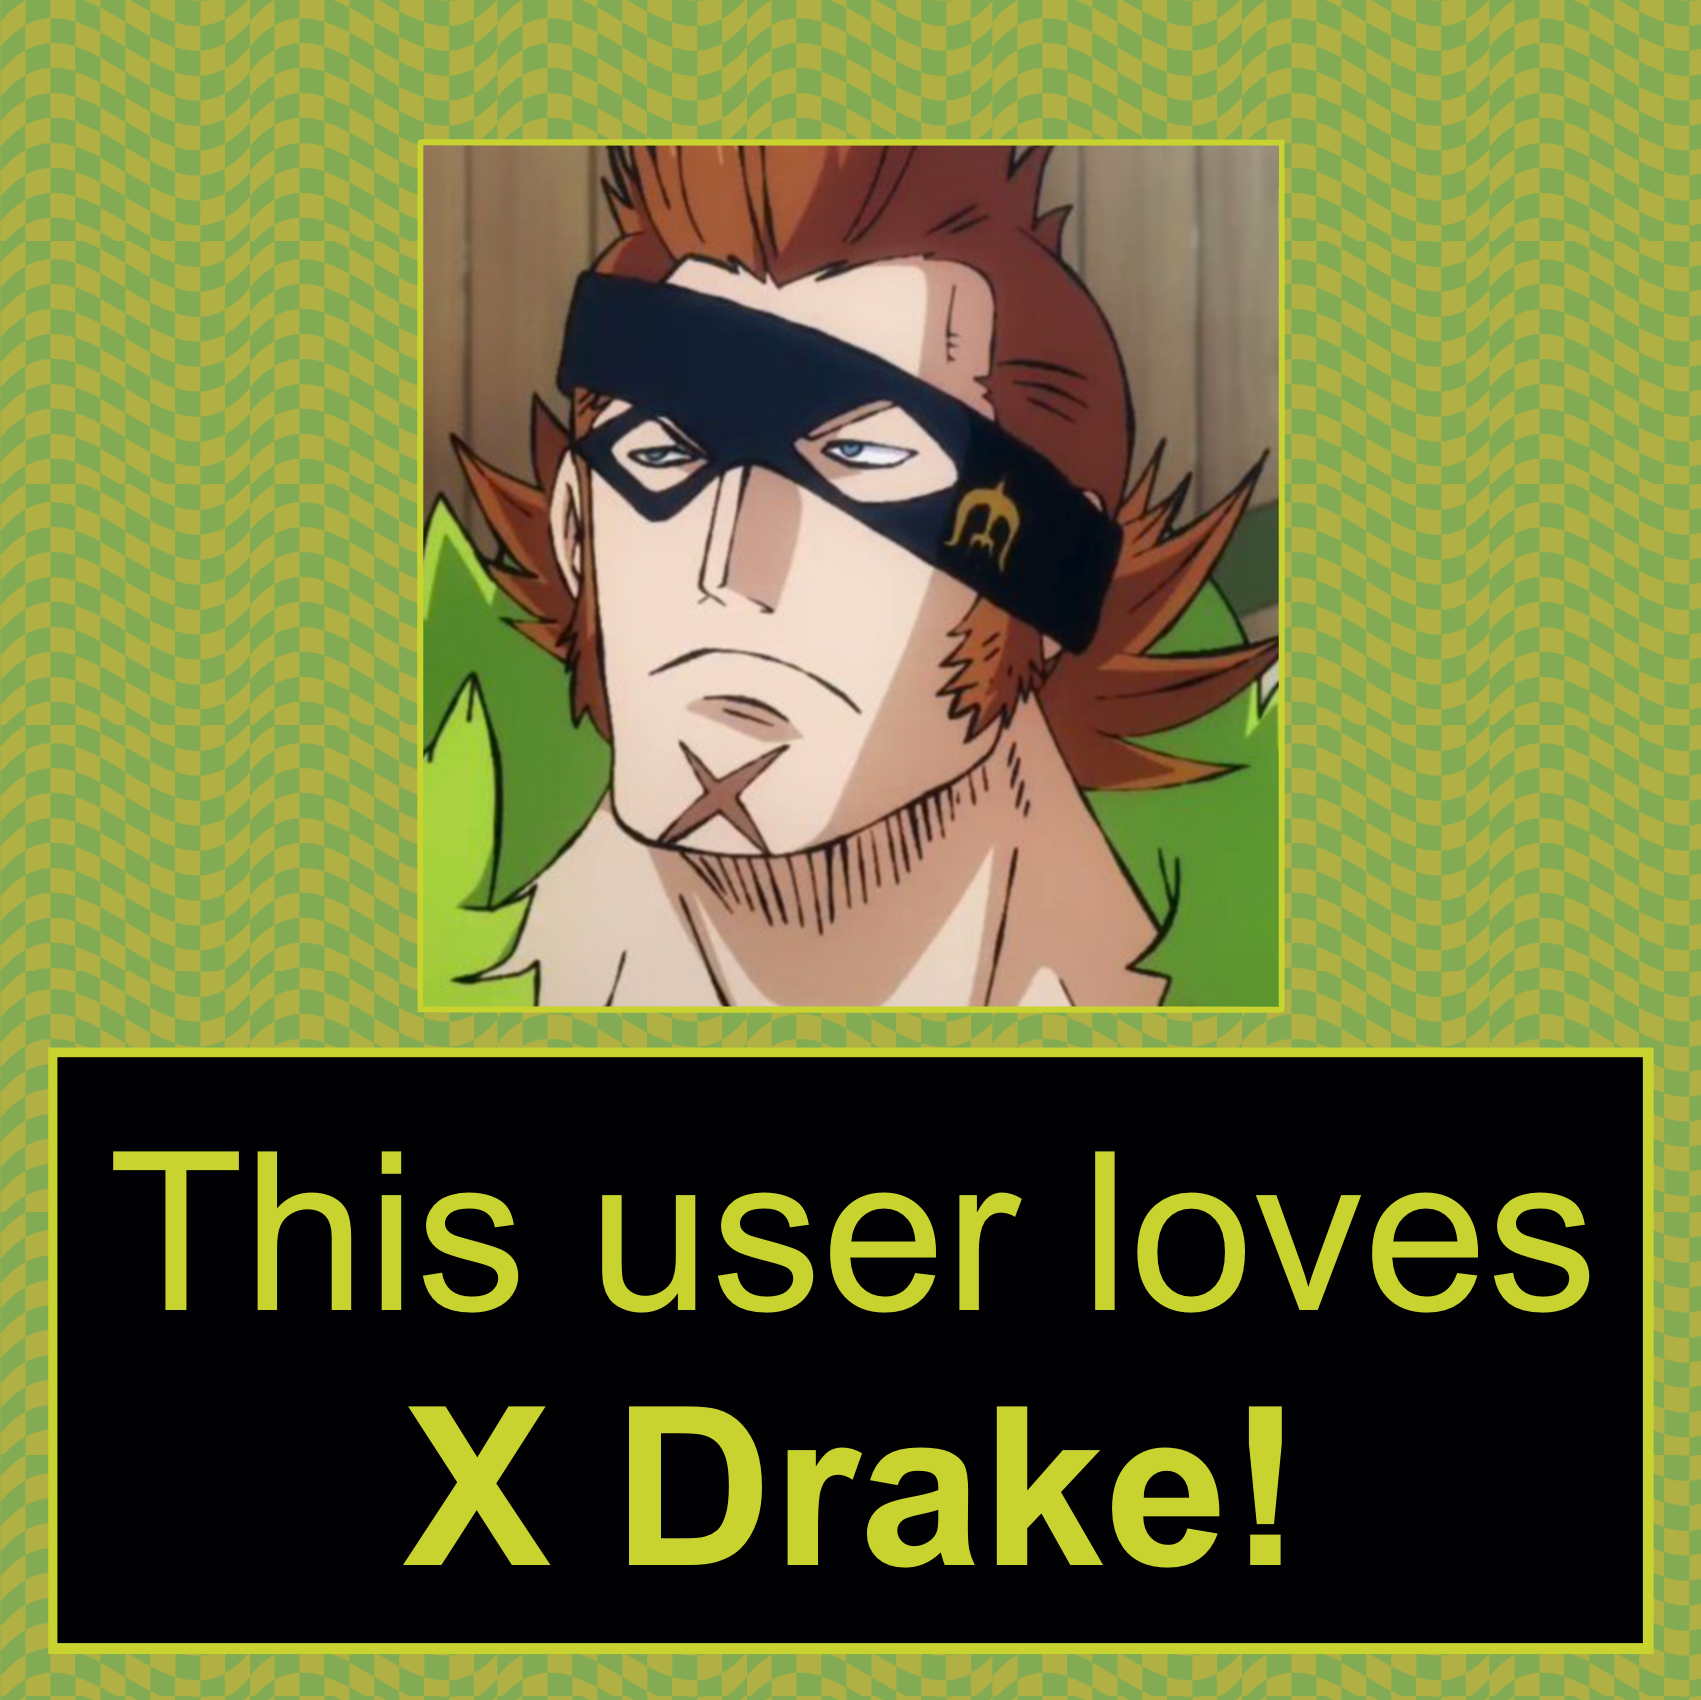 Image with a picture of X Drake from One Piece with the text 'This user loves X Drake!'